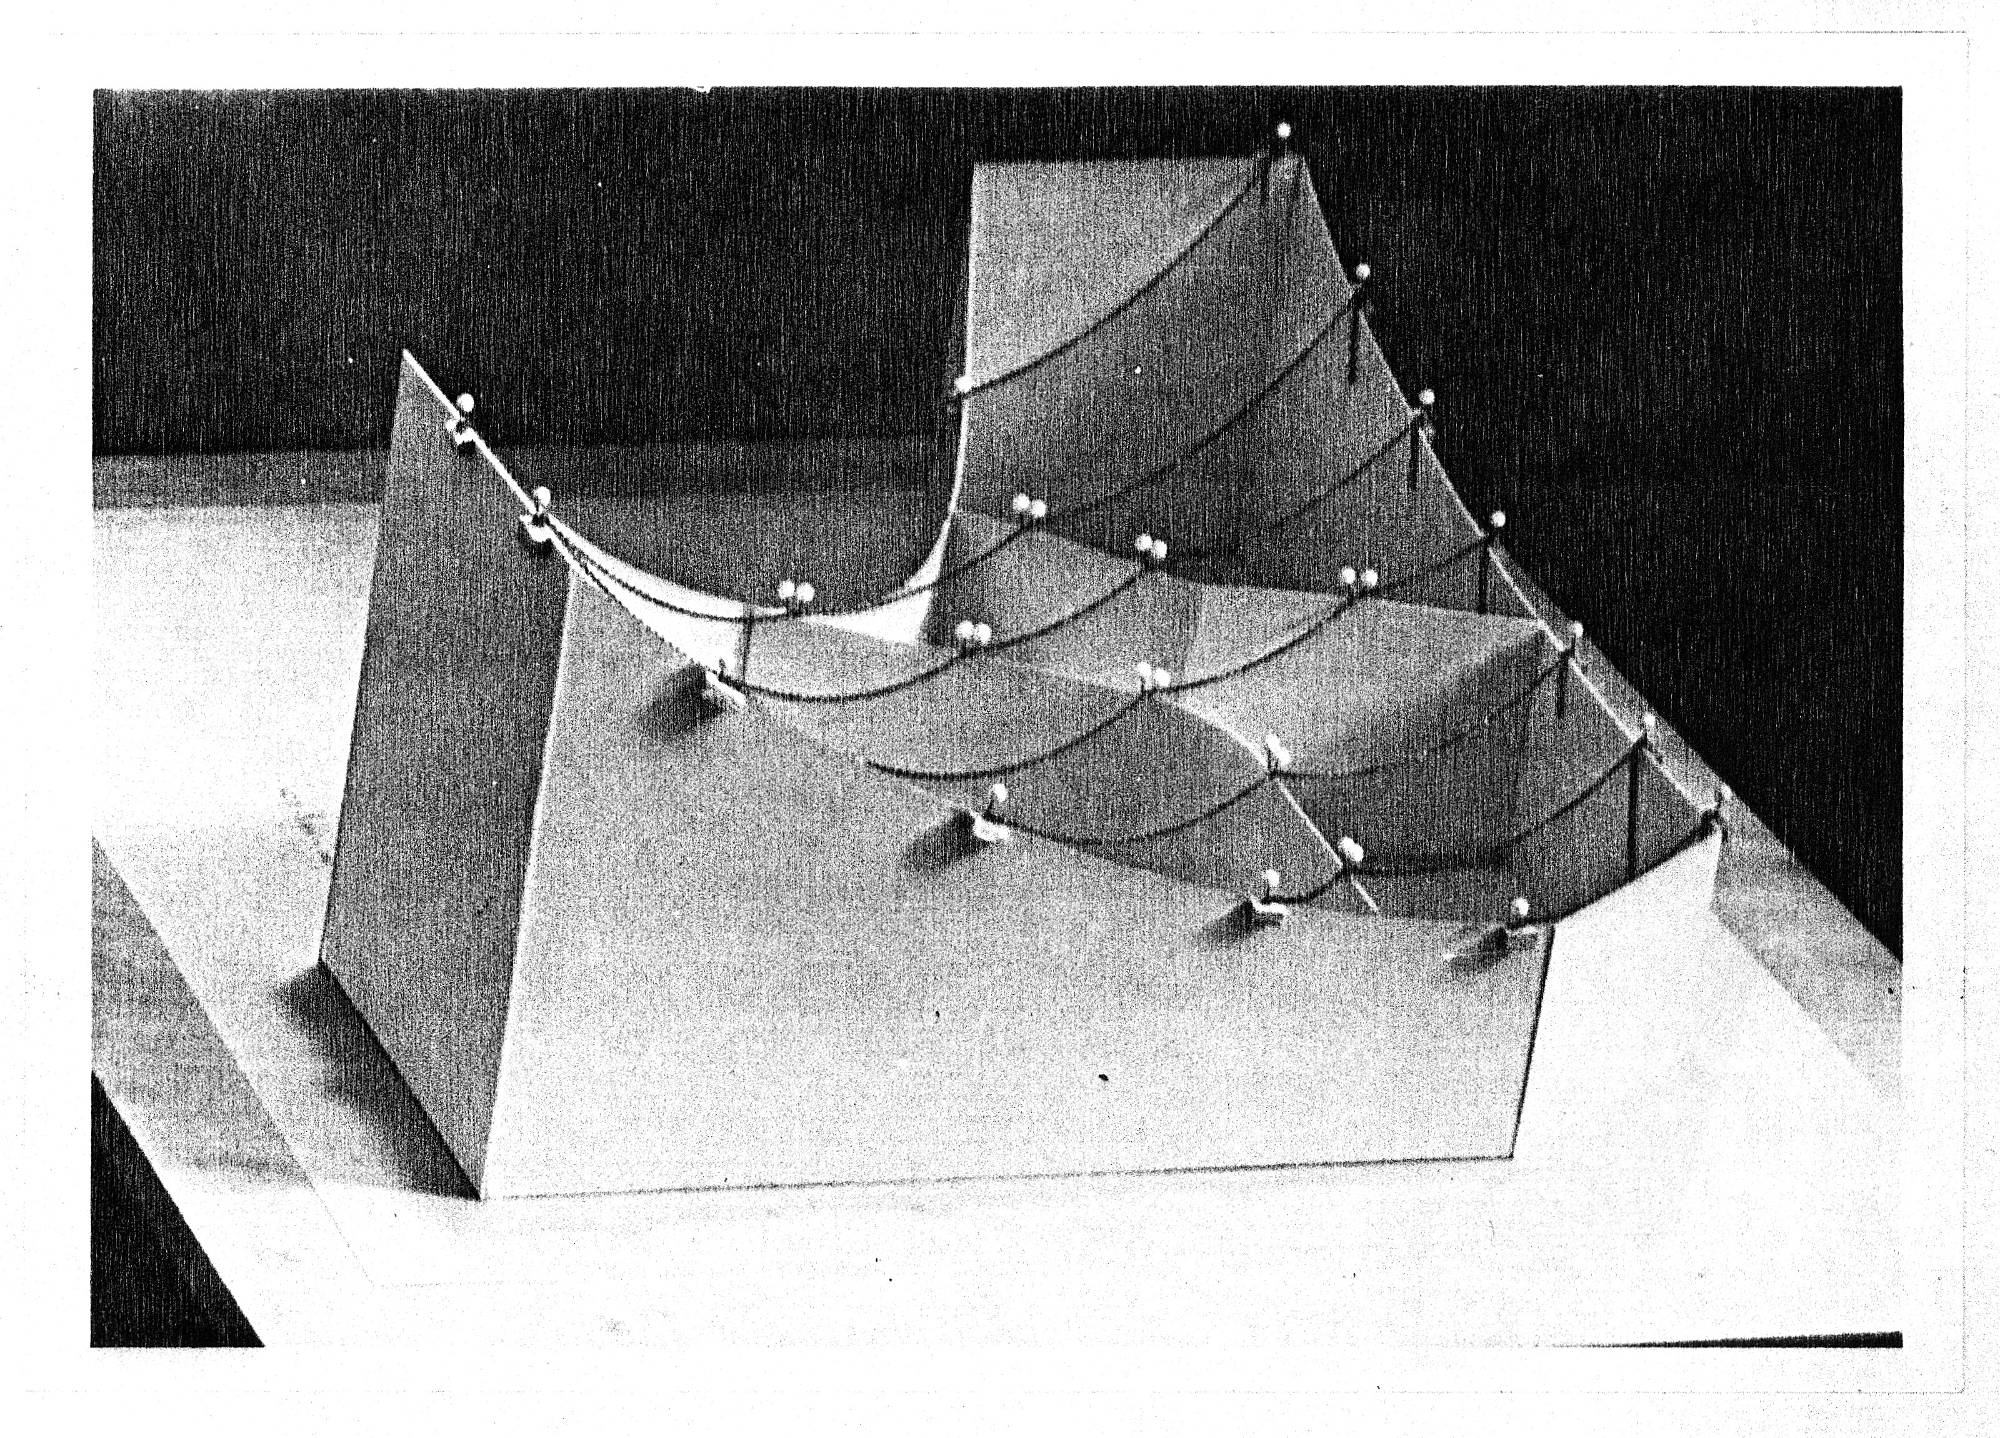 Hong Kong Cultural Centre roof structure model 1981